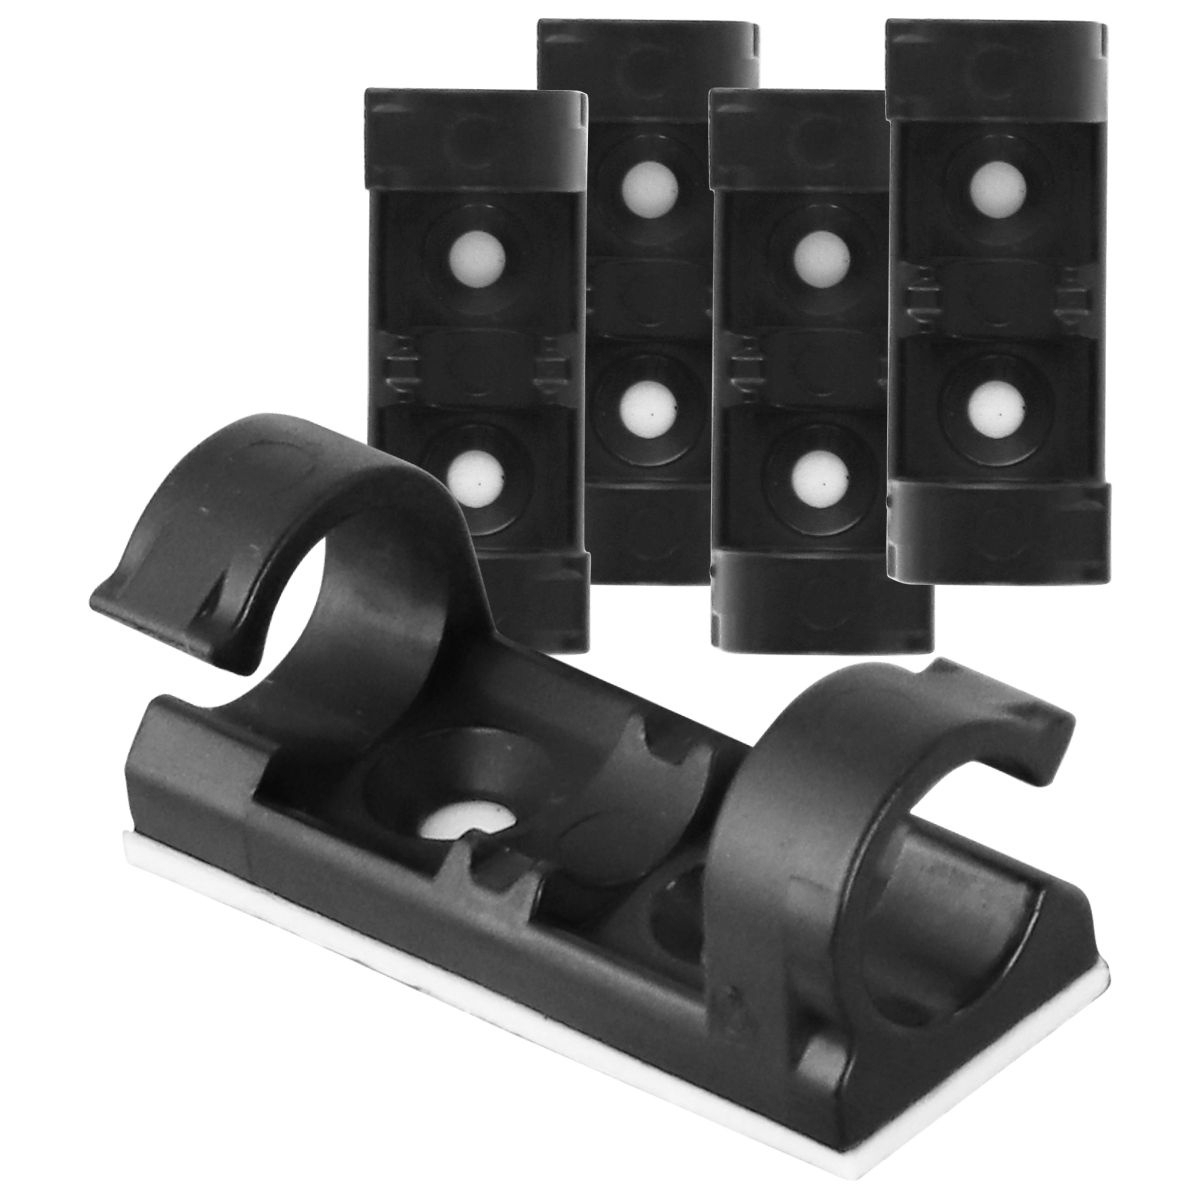 Verizon 5 Pack Of Adhesive Cable Management Clips - Black (SFE116CCR)